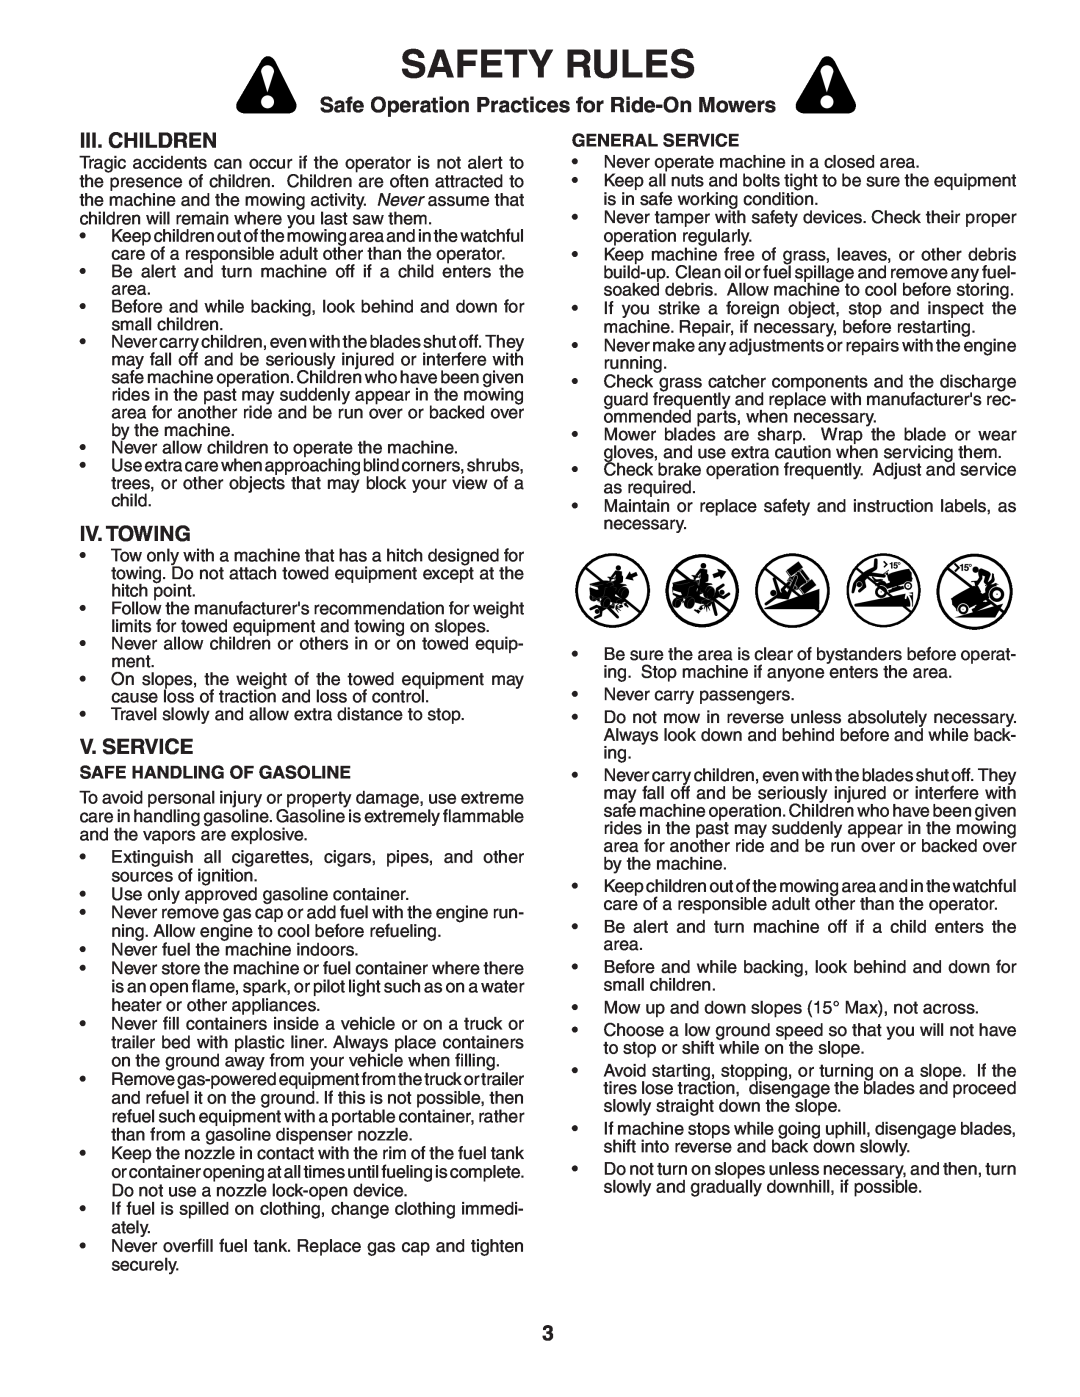 Poulan 402993 manual Iii. Children, Iv. Towing, V. Service, Safety Rules, Safe Operation Practices for Ride-On Mowers 